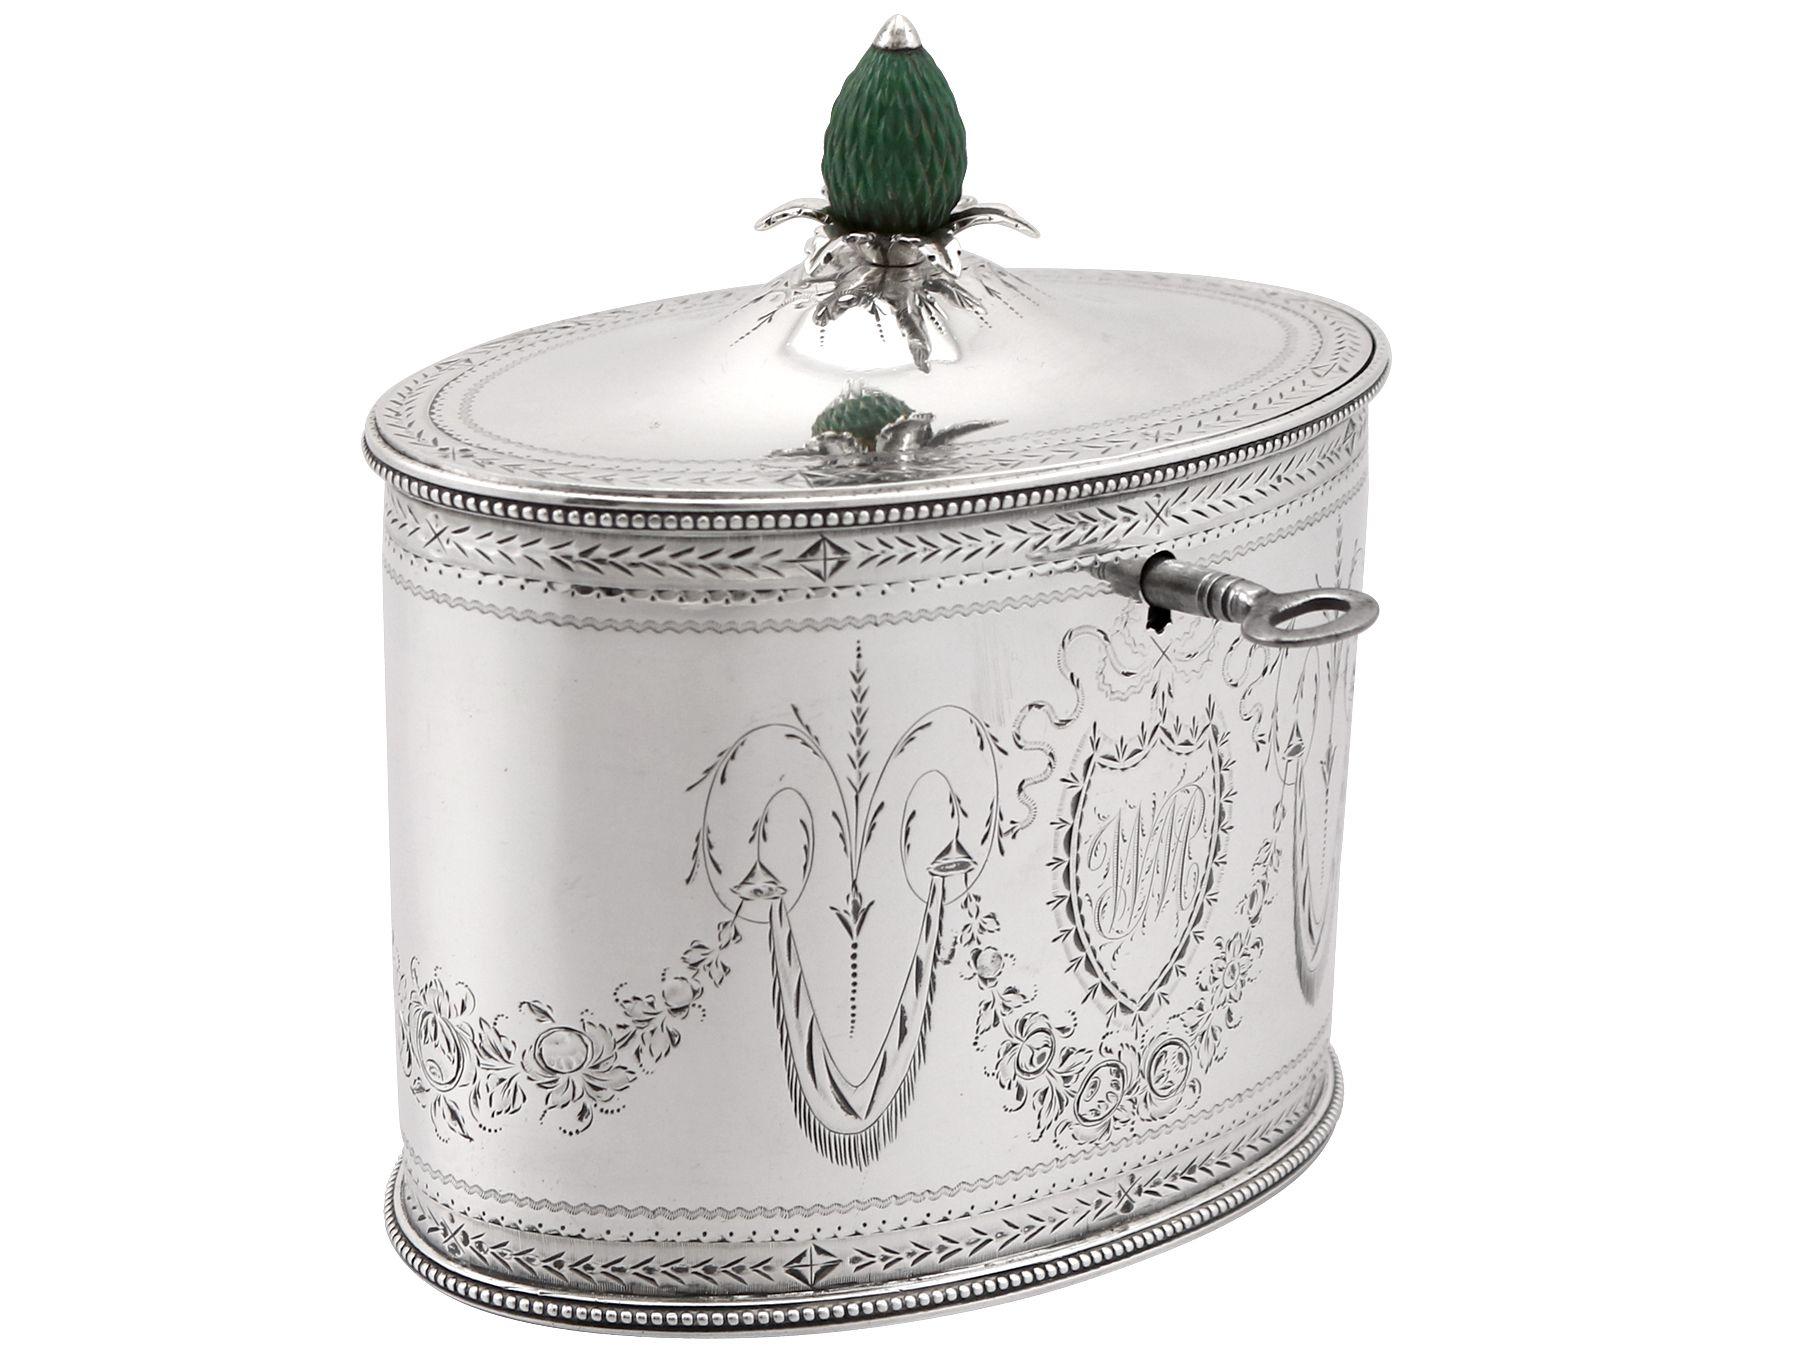 Antique George III Sterling Silver Locking Tea Caddy by Henry Chawner In Excellent Condition For Sale In Jesmond, Newcastle Upon Tyne